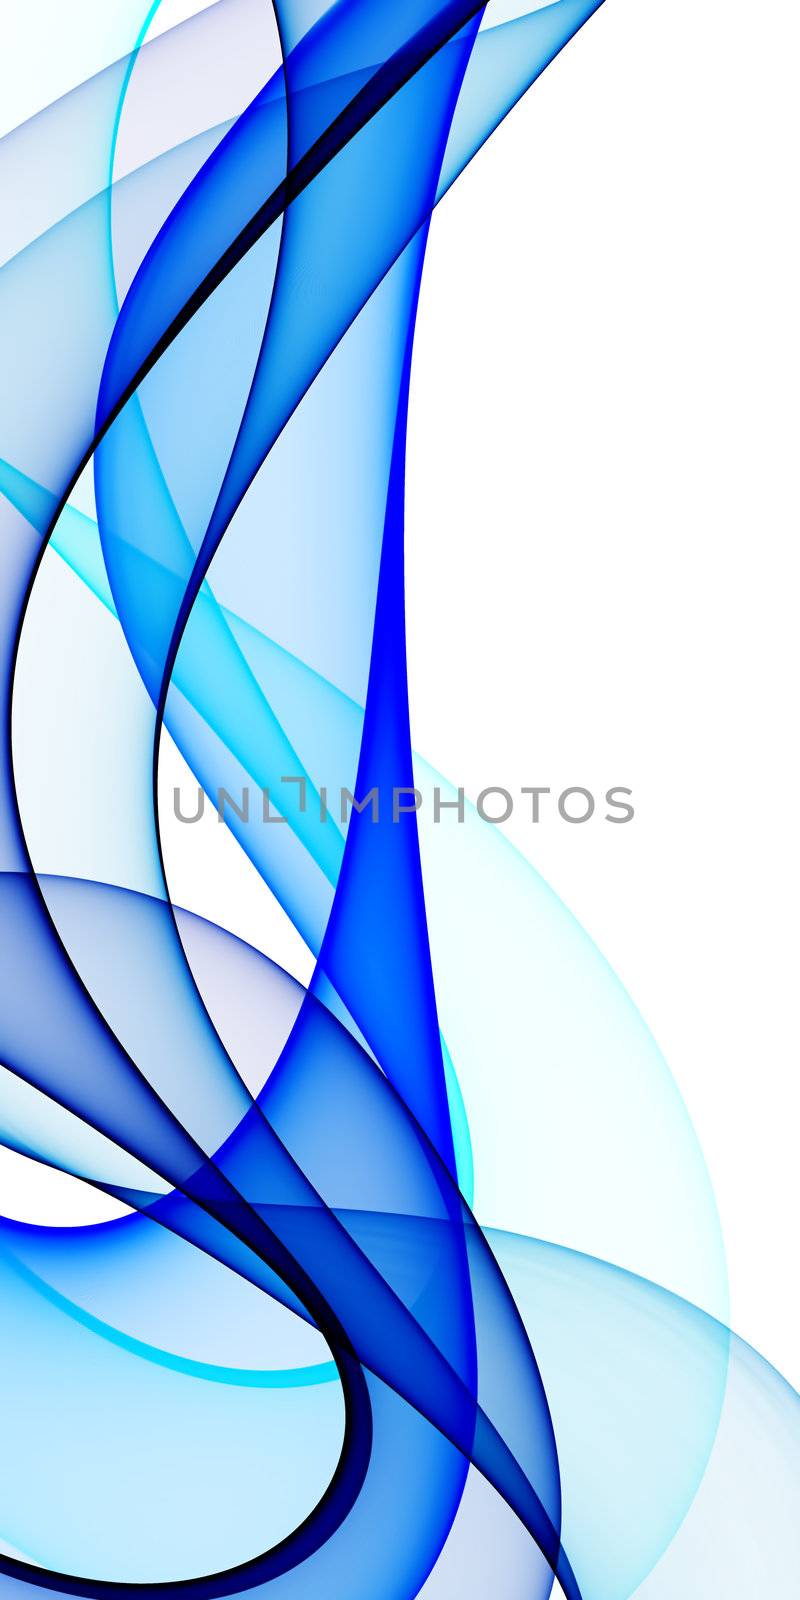 Smooth waves from blue tones on a white background by Serp